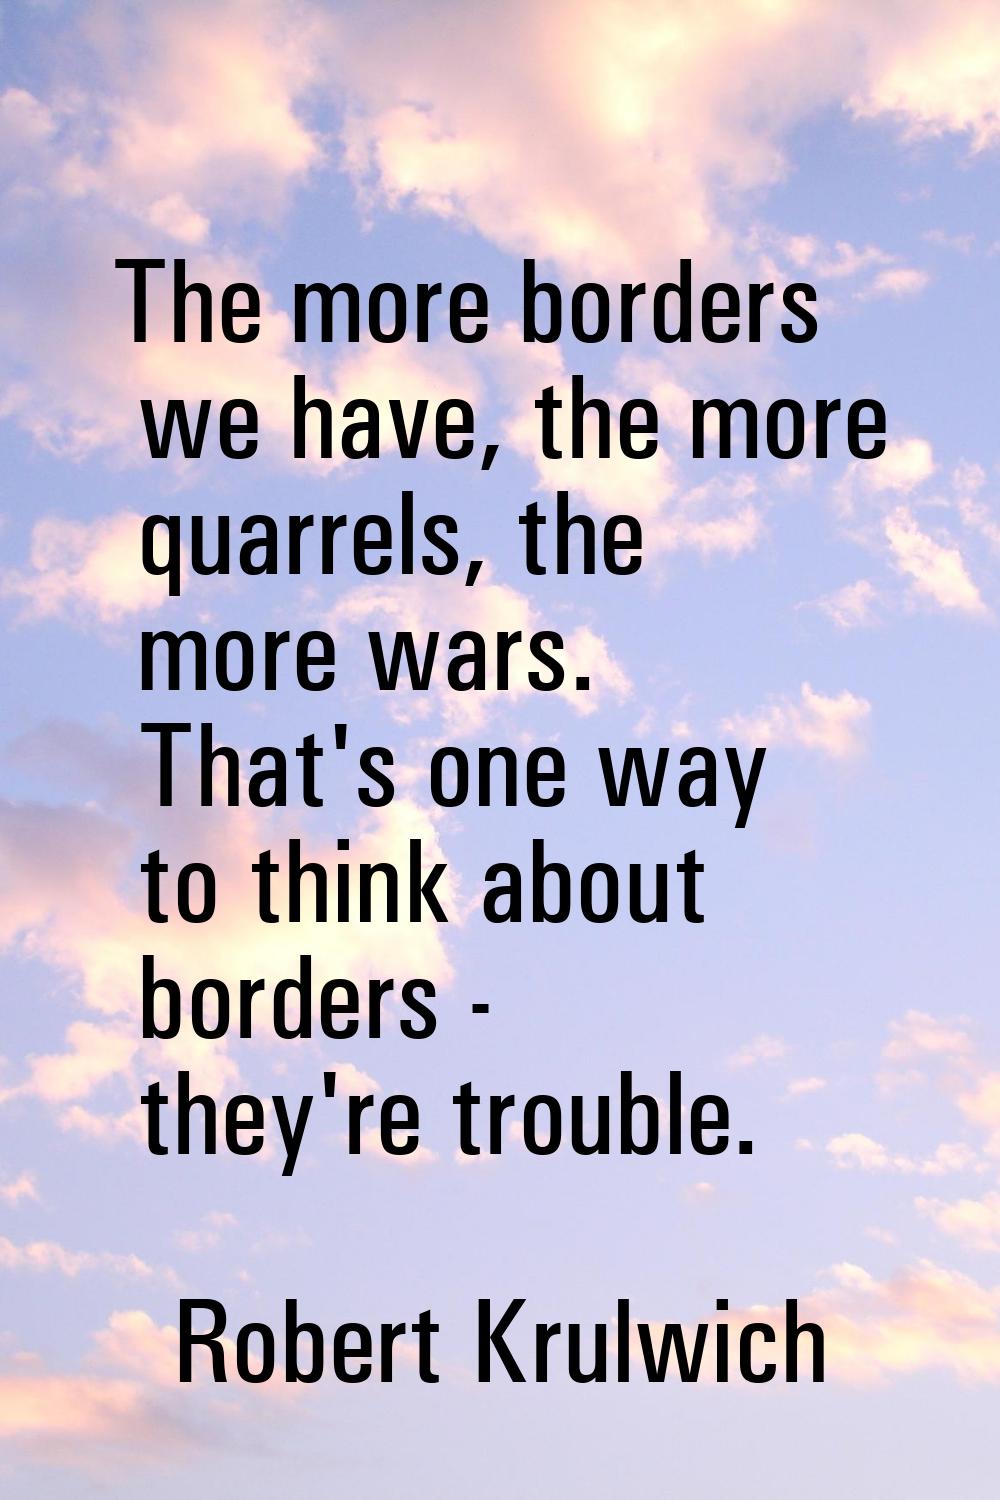 The more borders we have, the more quarrels, the more wars. That's one way to think about borders -